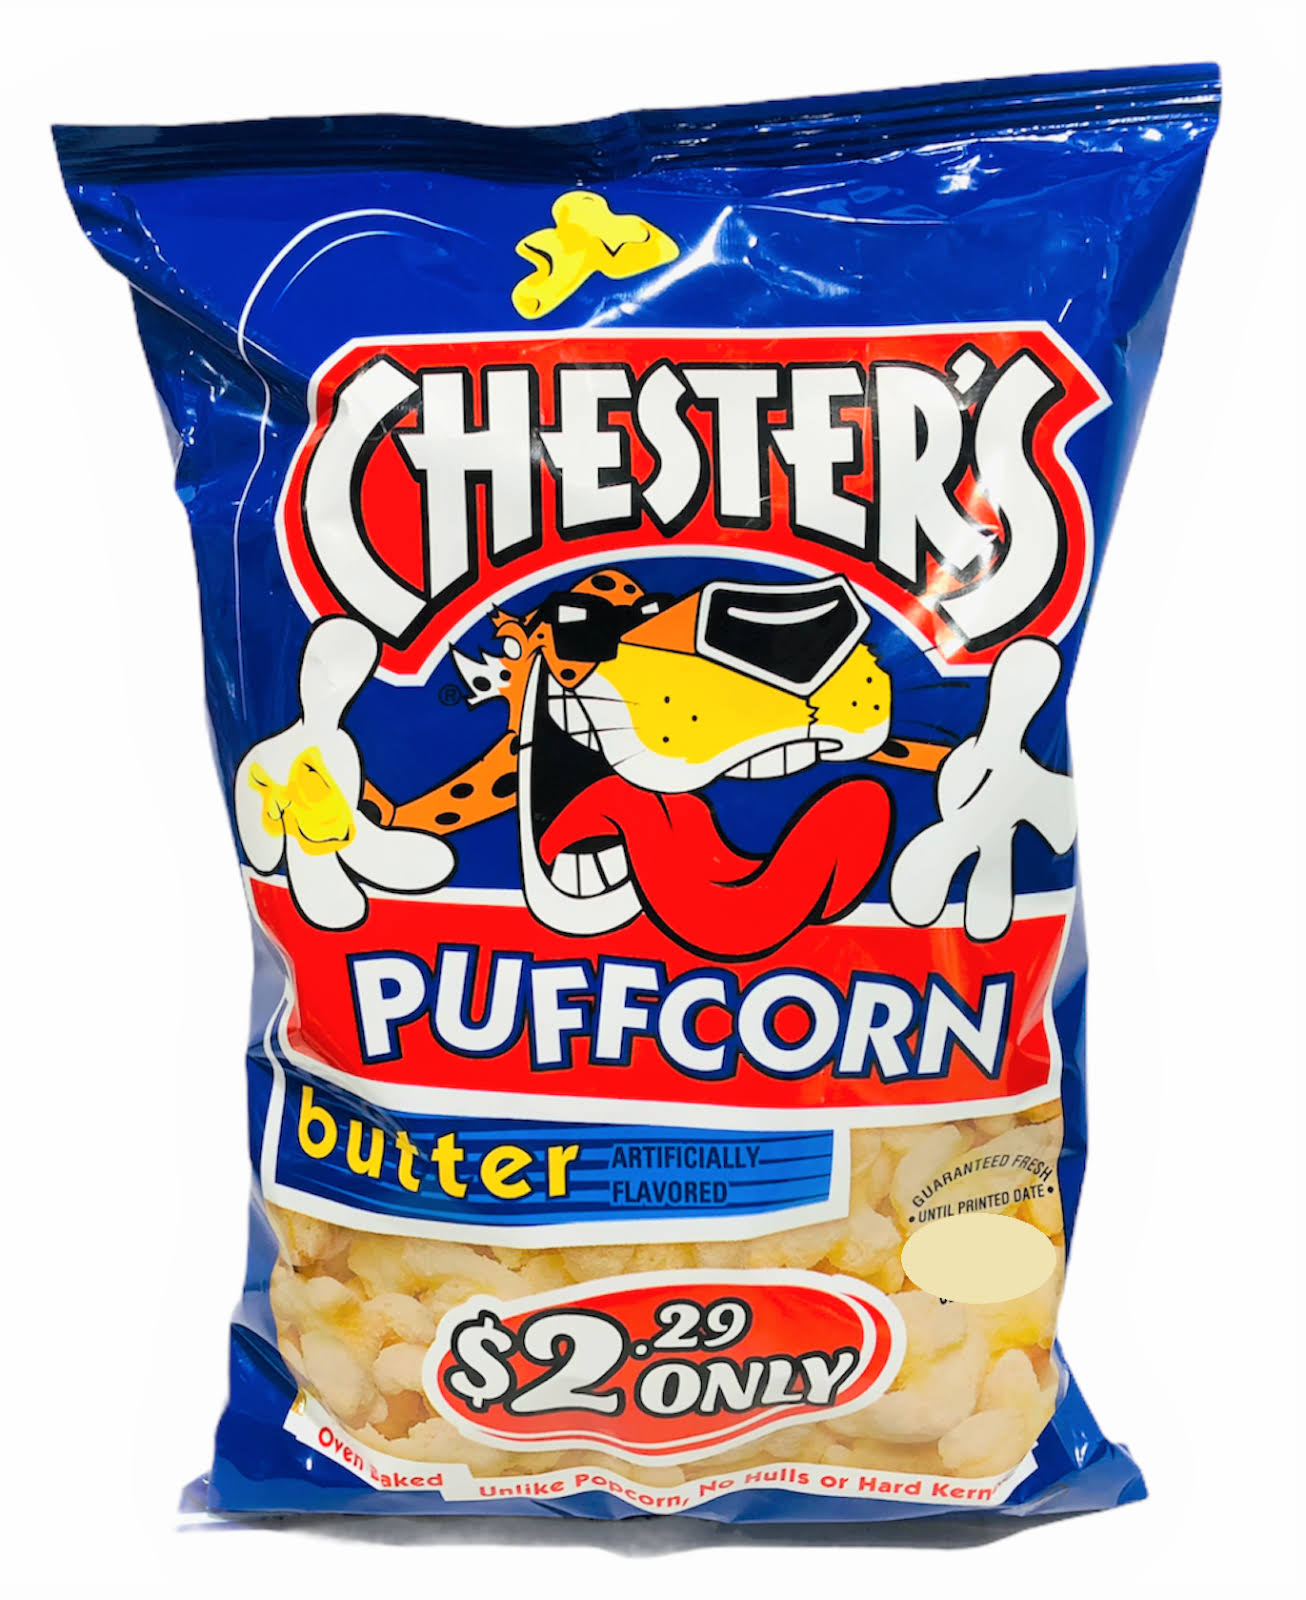 Chesters Puffcorn, Butter - 3.25 oz